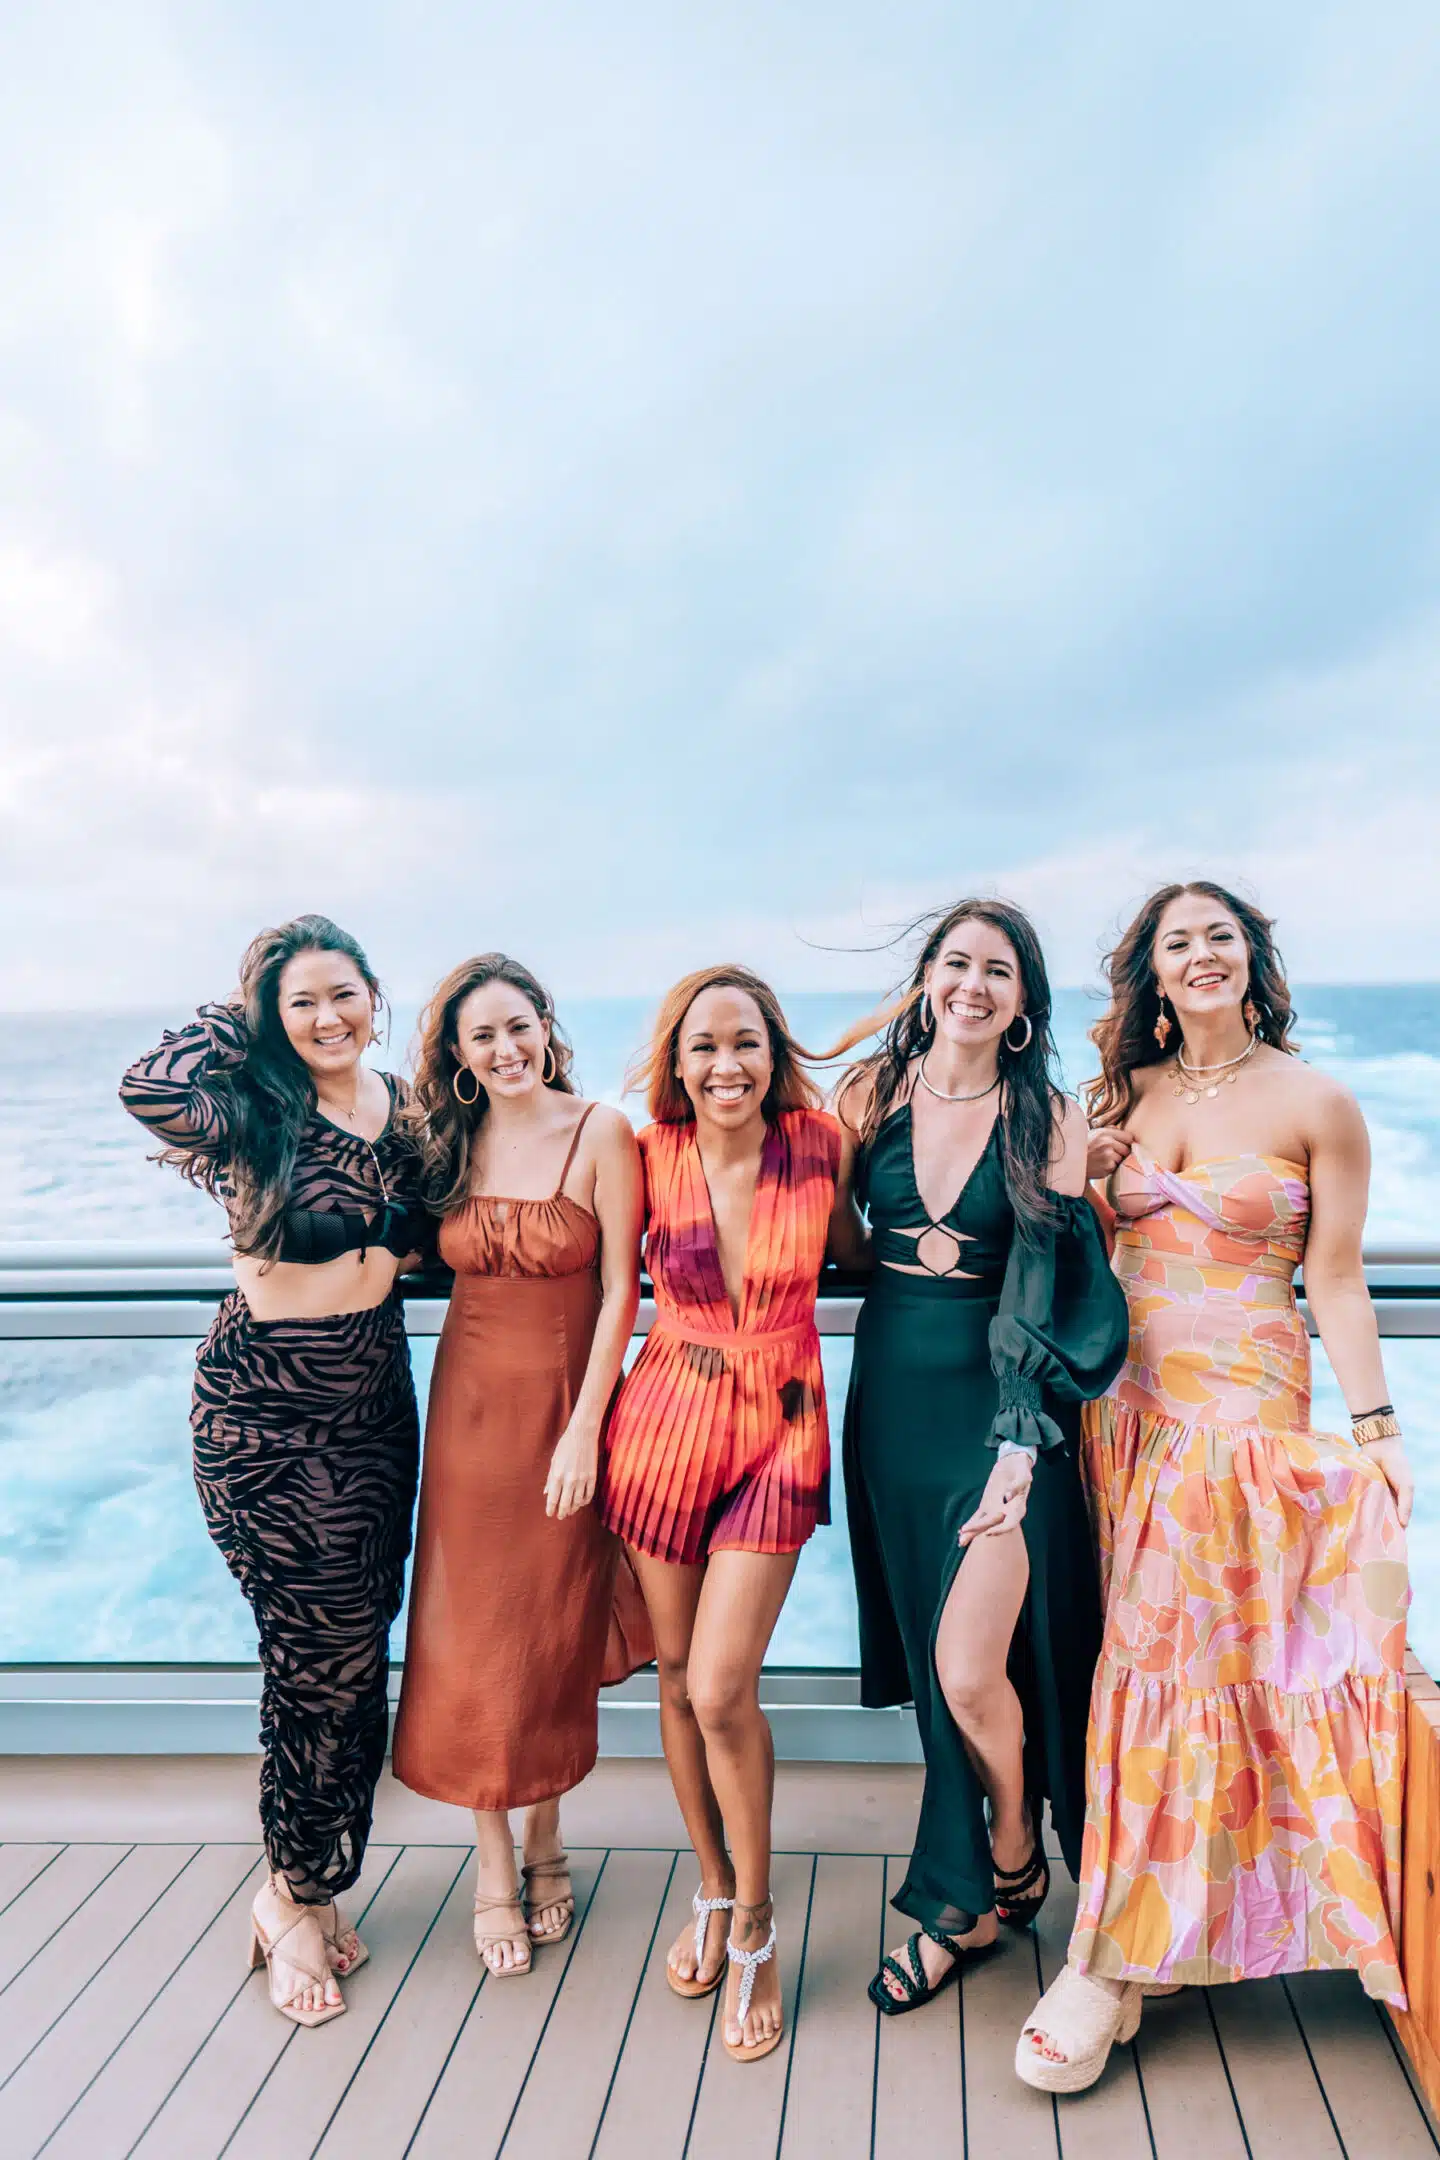 Caribbean cruise outfits, by fashion blogger What The Fab